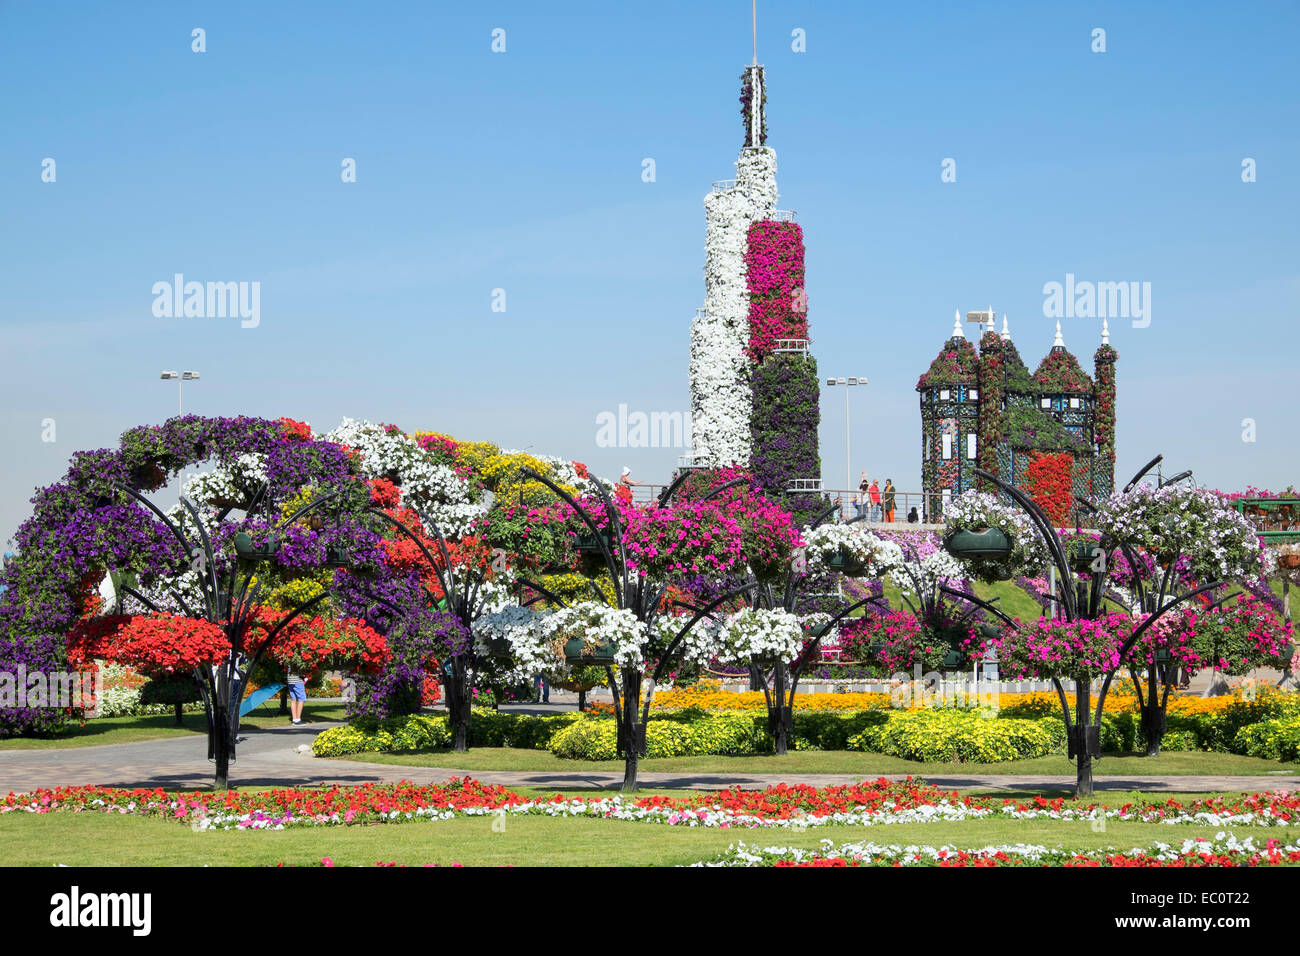 View of flower displays and landscaping  at  Miracle Garden the world's biggest flower garden in Dubai United Arab Emirates Stock Photo